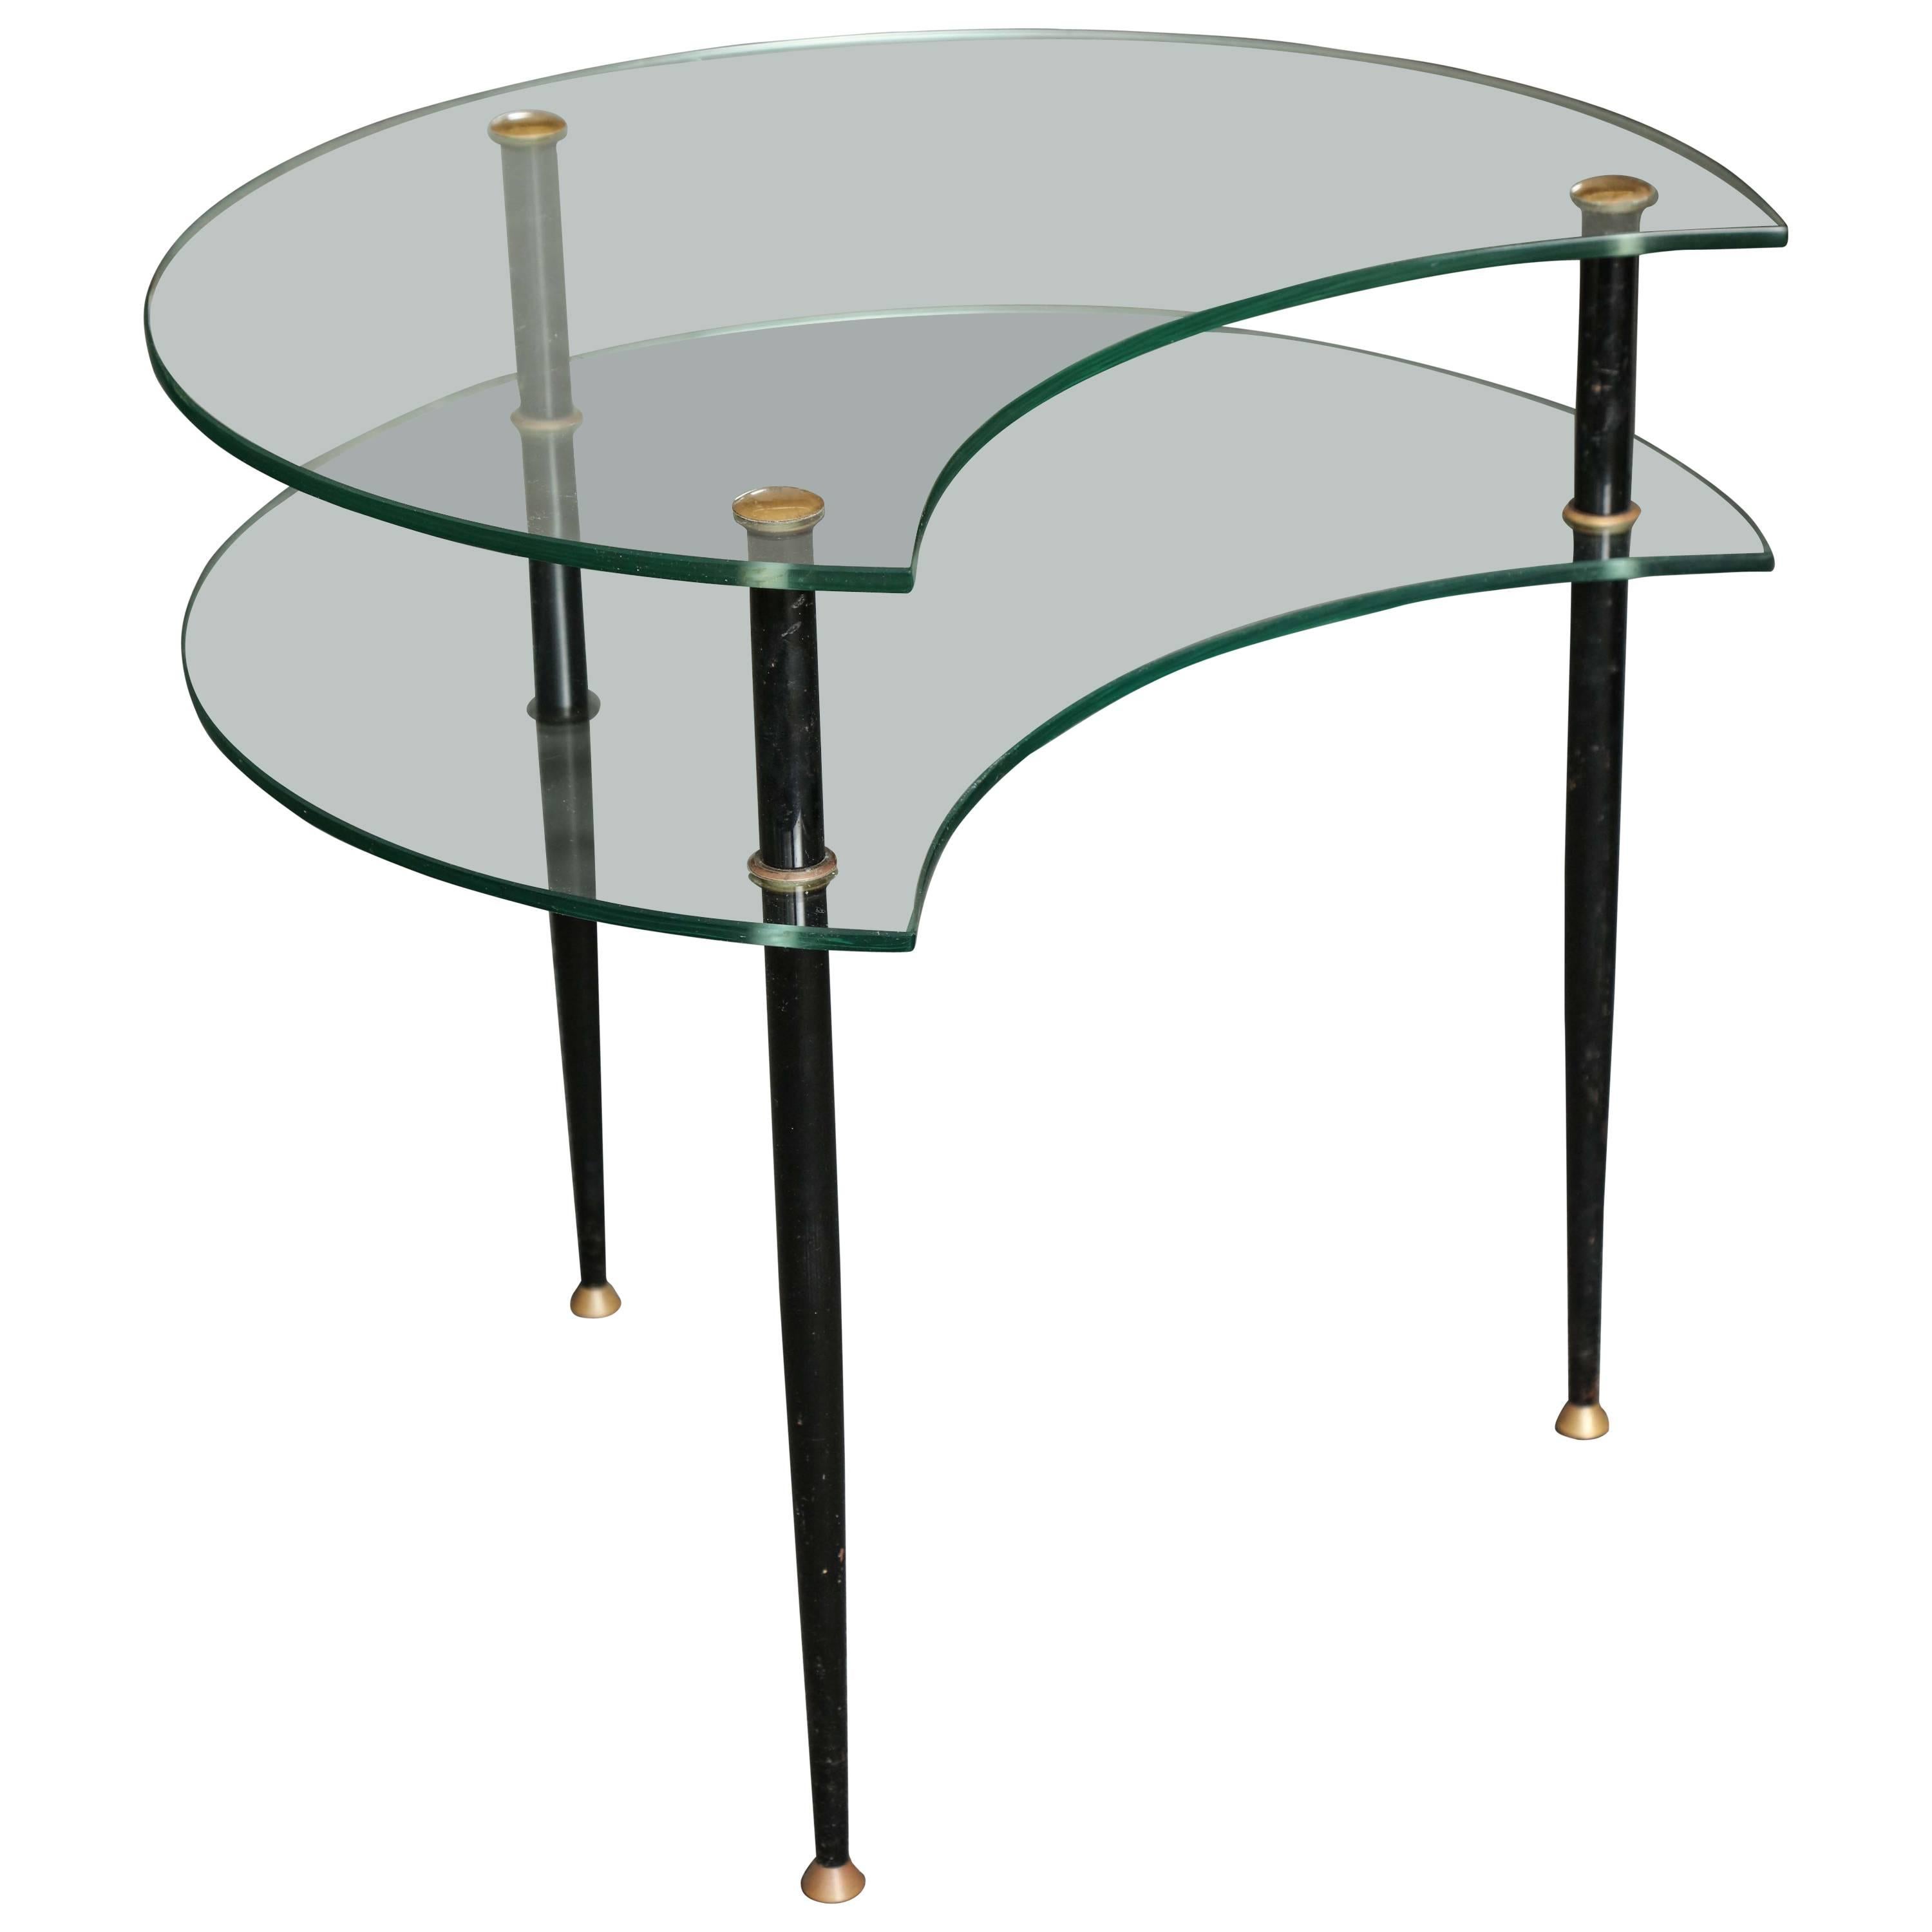 Stylish side table made in Italy 1960 by Vitrex, designed by Eduardo Paoli For Sale